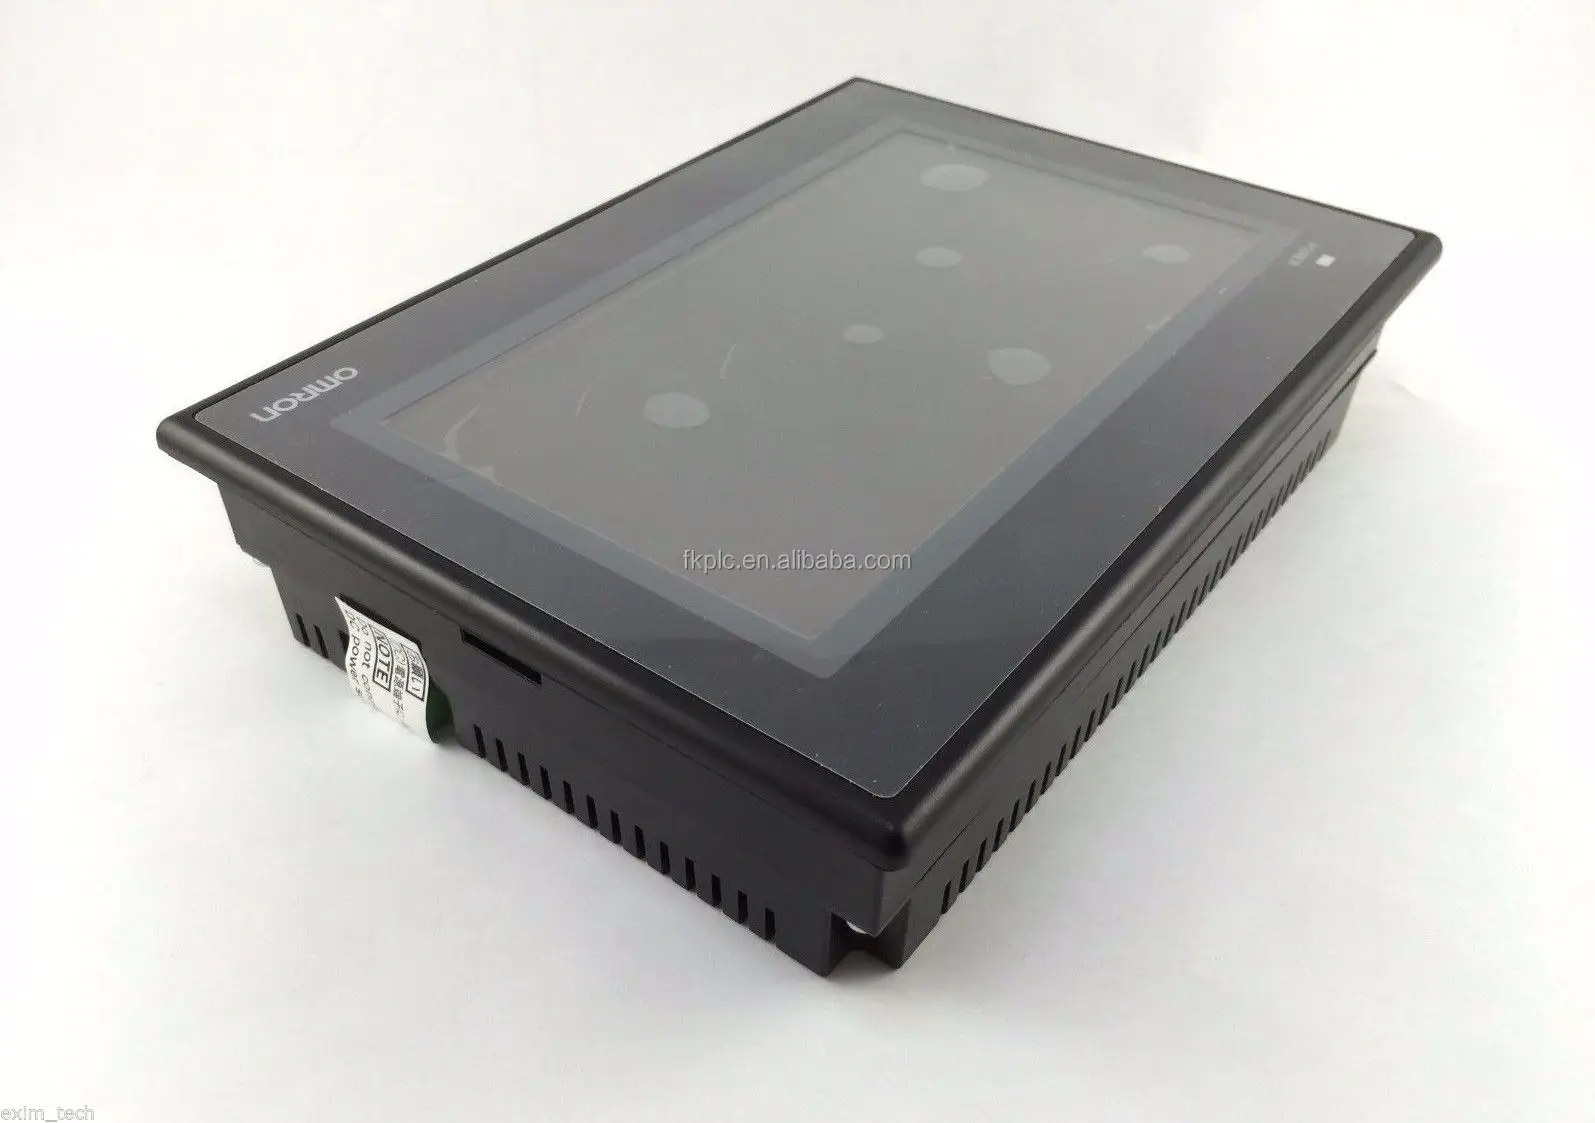 
Omron NB7W-TW01B HMI 7 Inch TFT LCD Display 800*480 NB7WTW01B Touch Panel NB7W Applicable Controllers